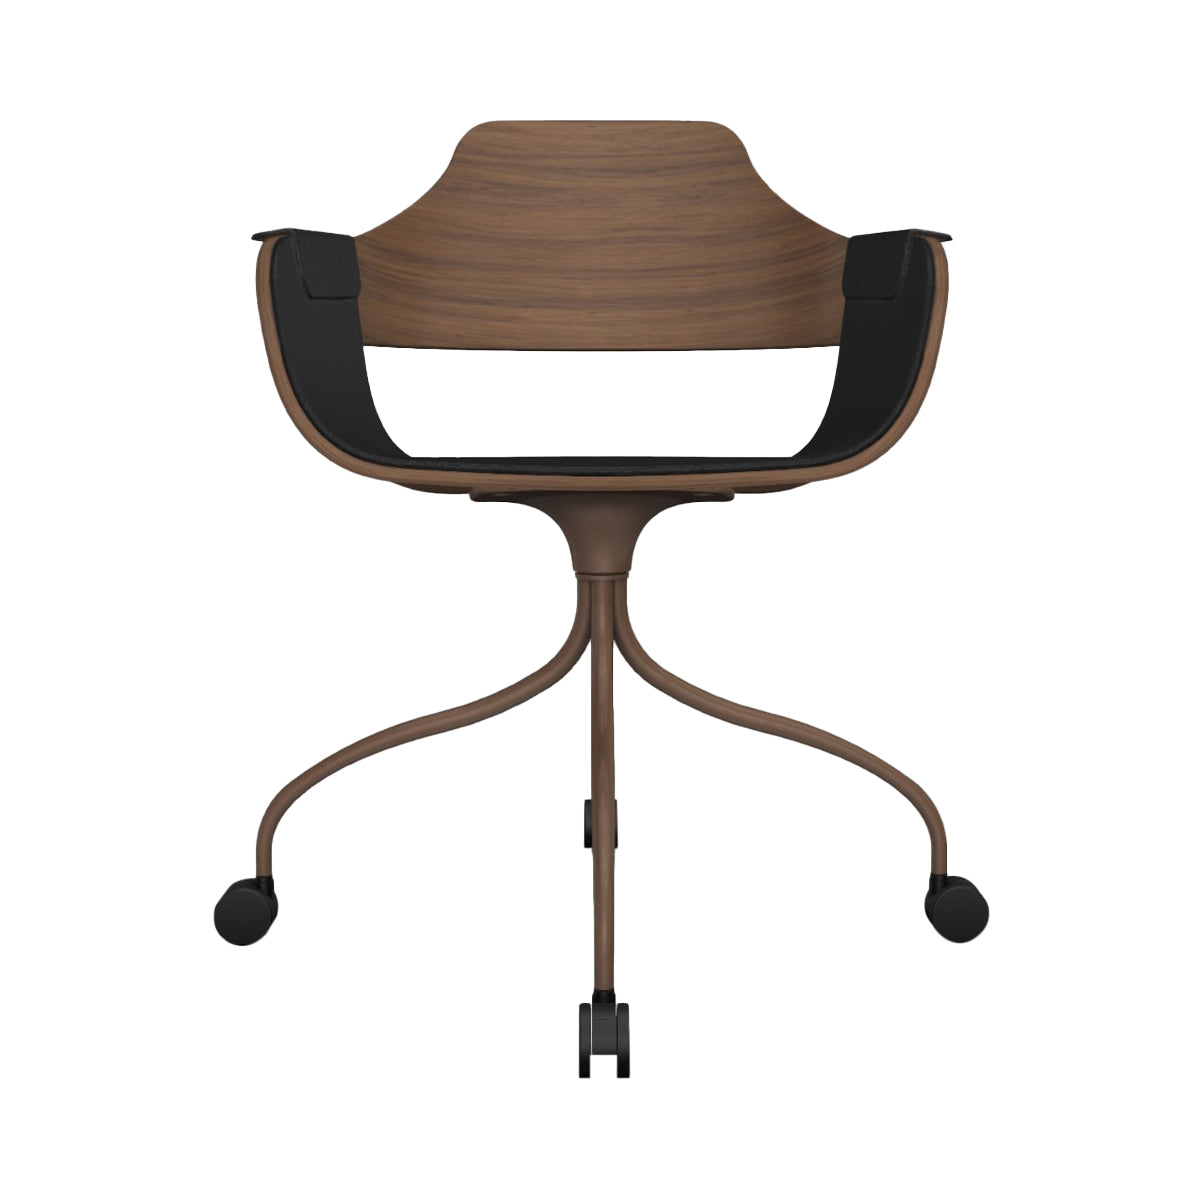 Showtime Chair with Wheel: Interior Seat + Armrest Upholstered + Pale Brown